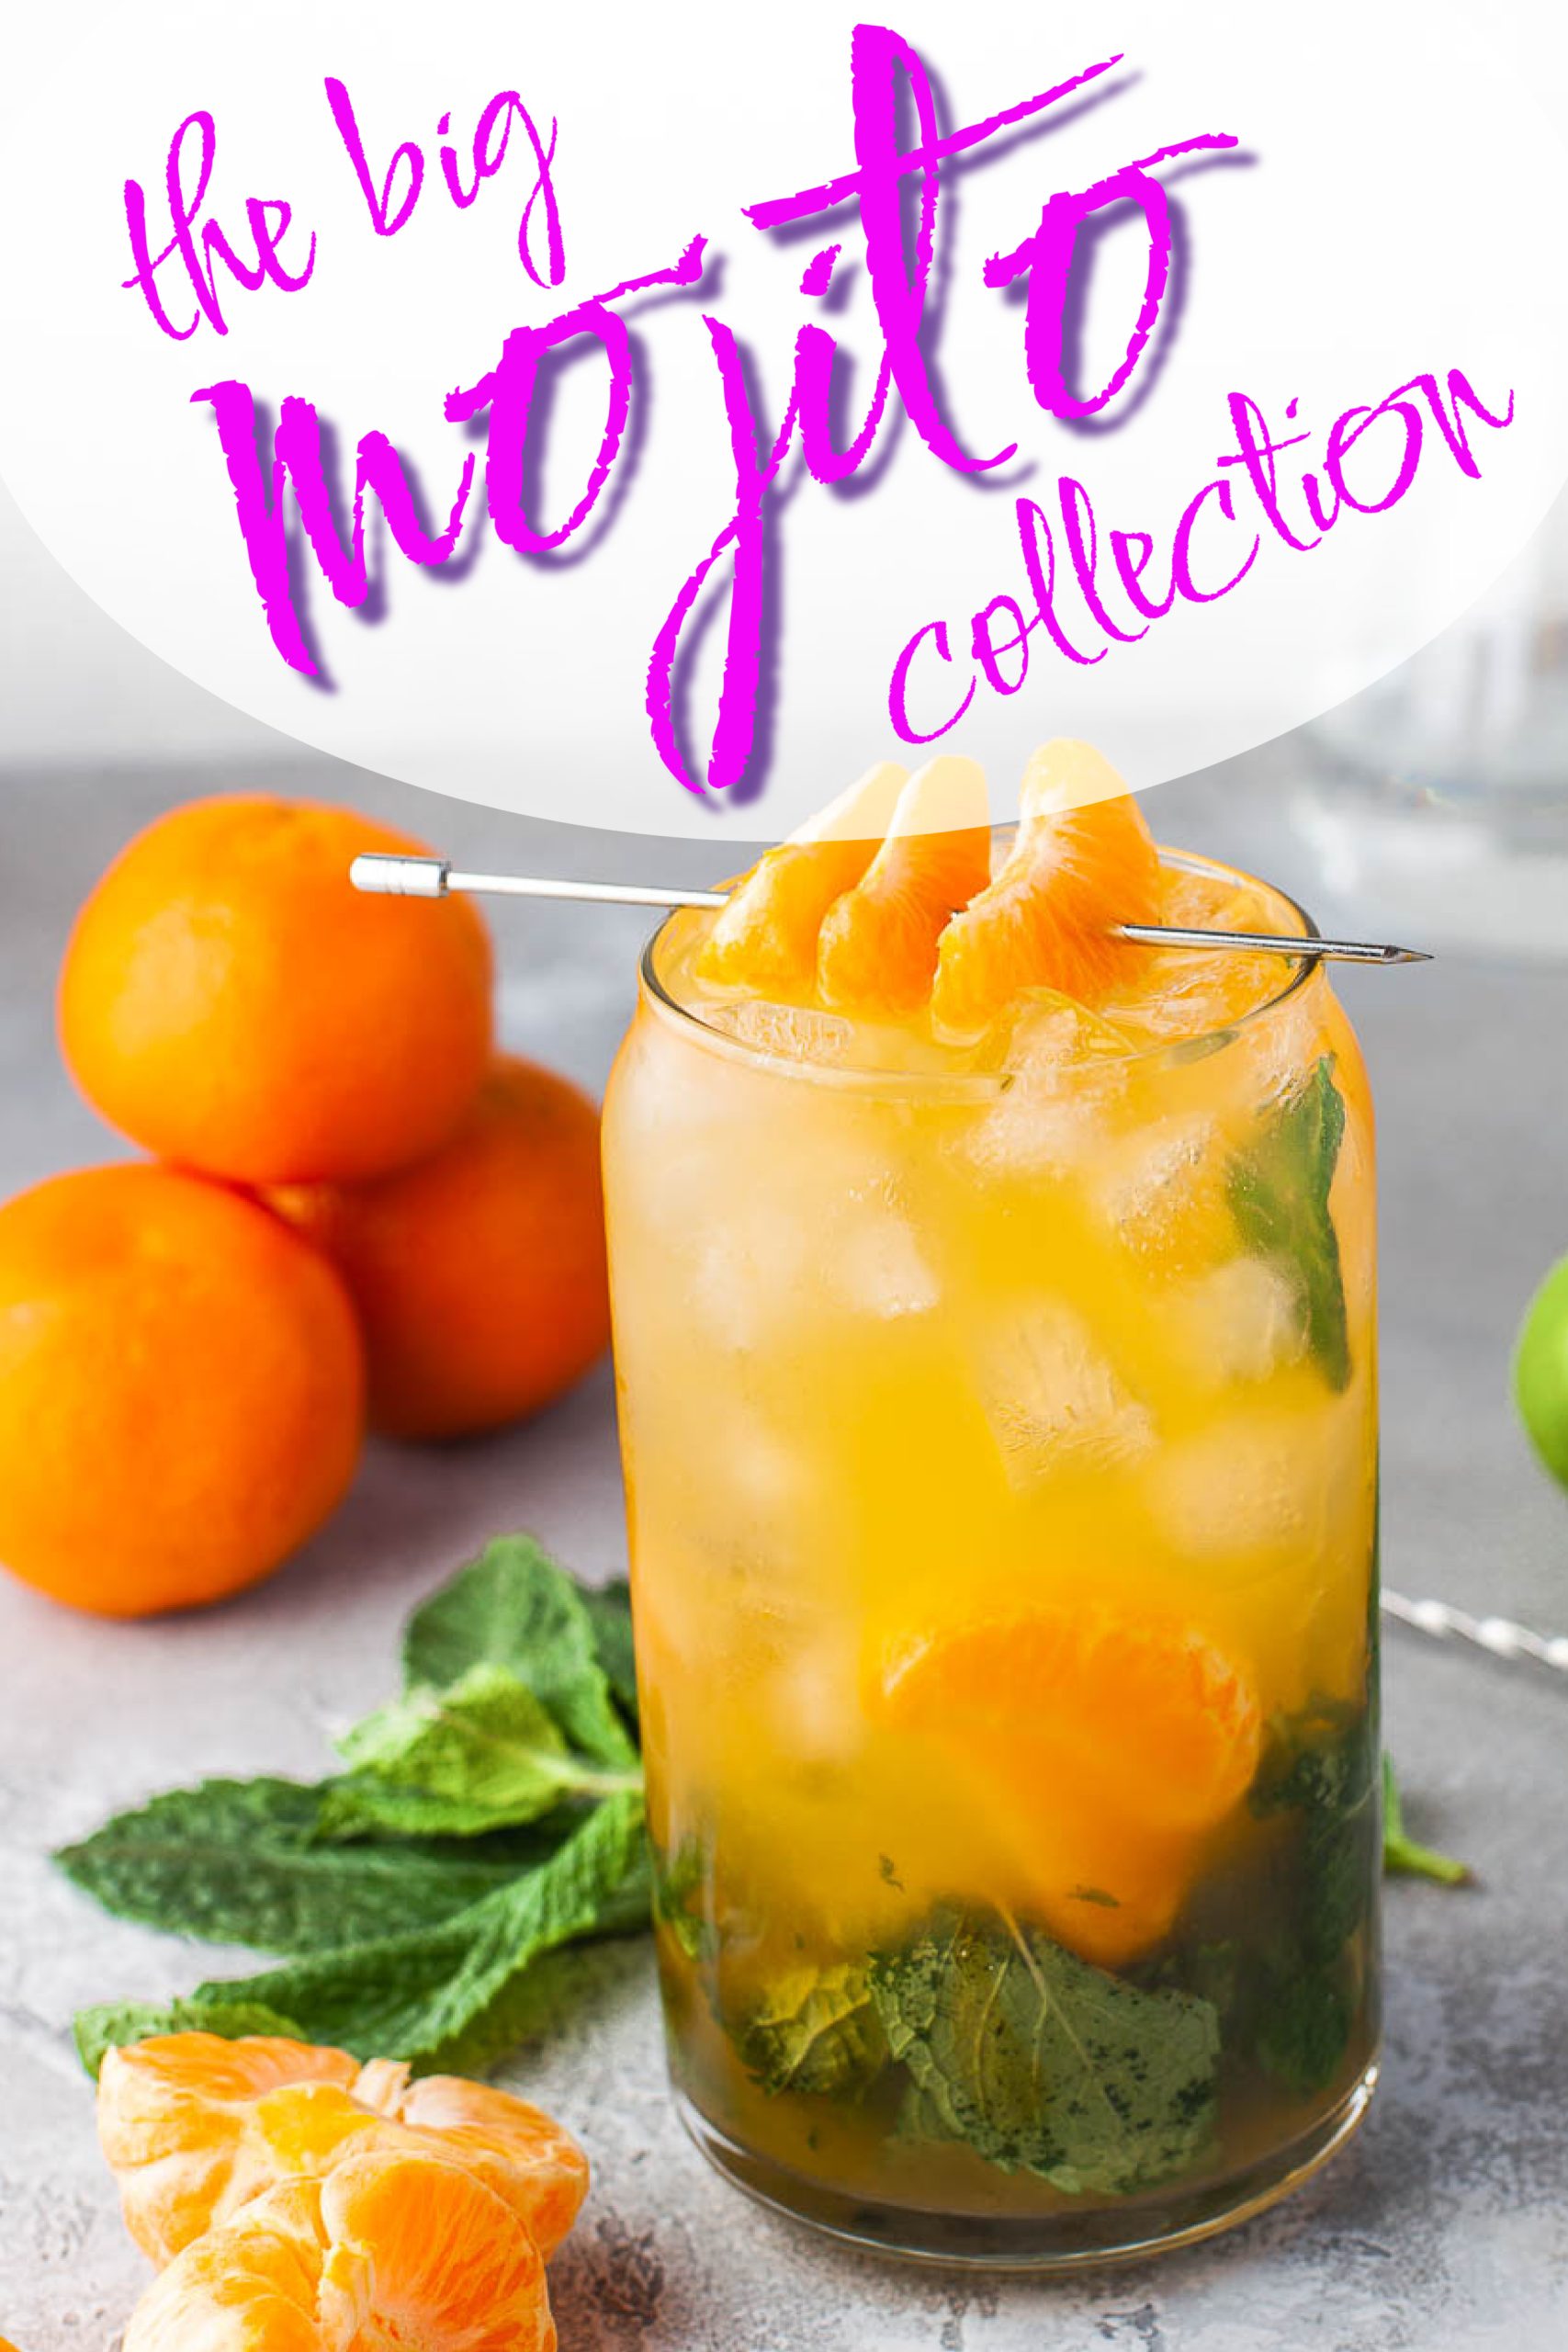 Glass filled with Orange Mojito and orange slices laying on table beside the drink.